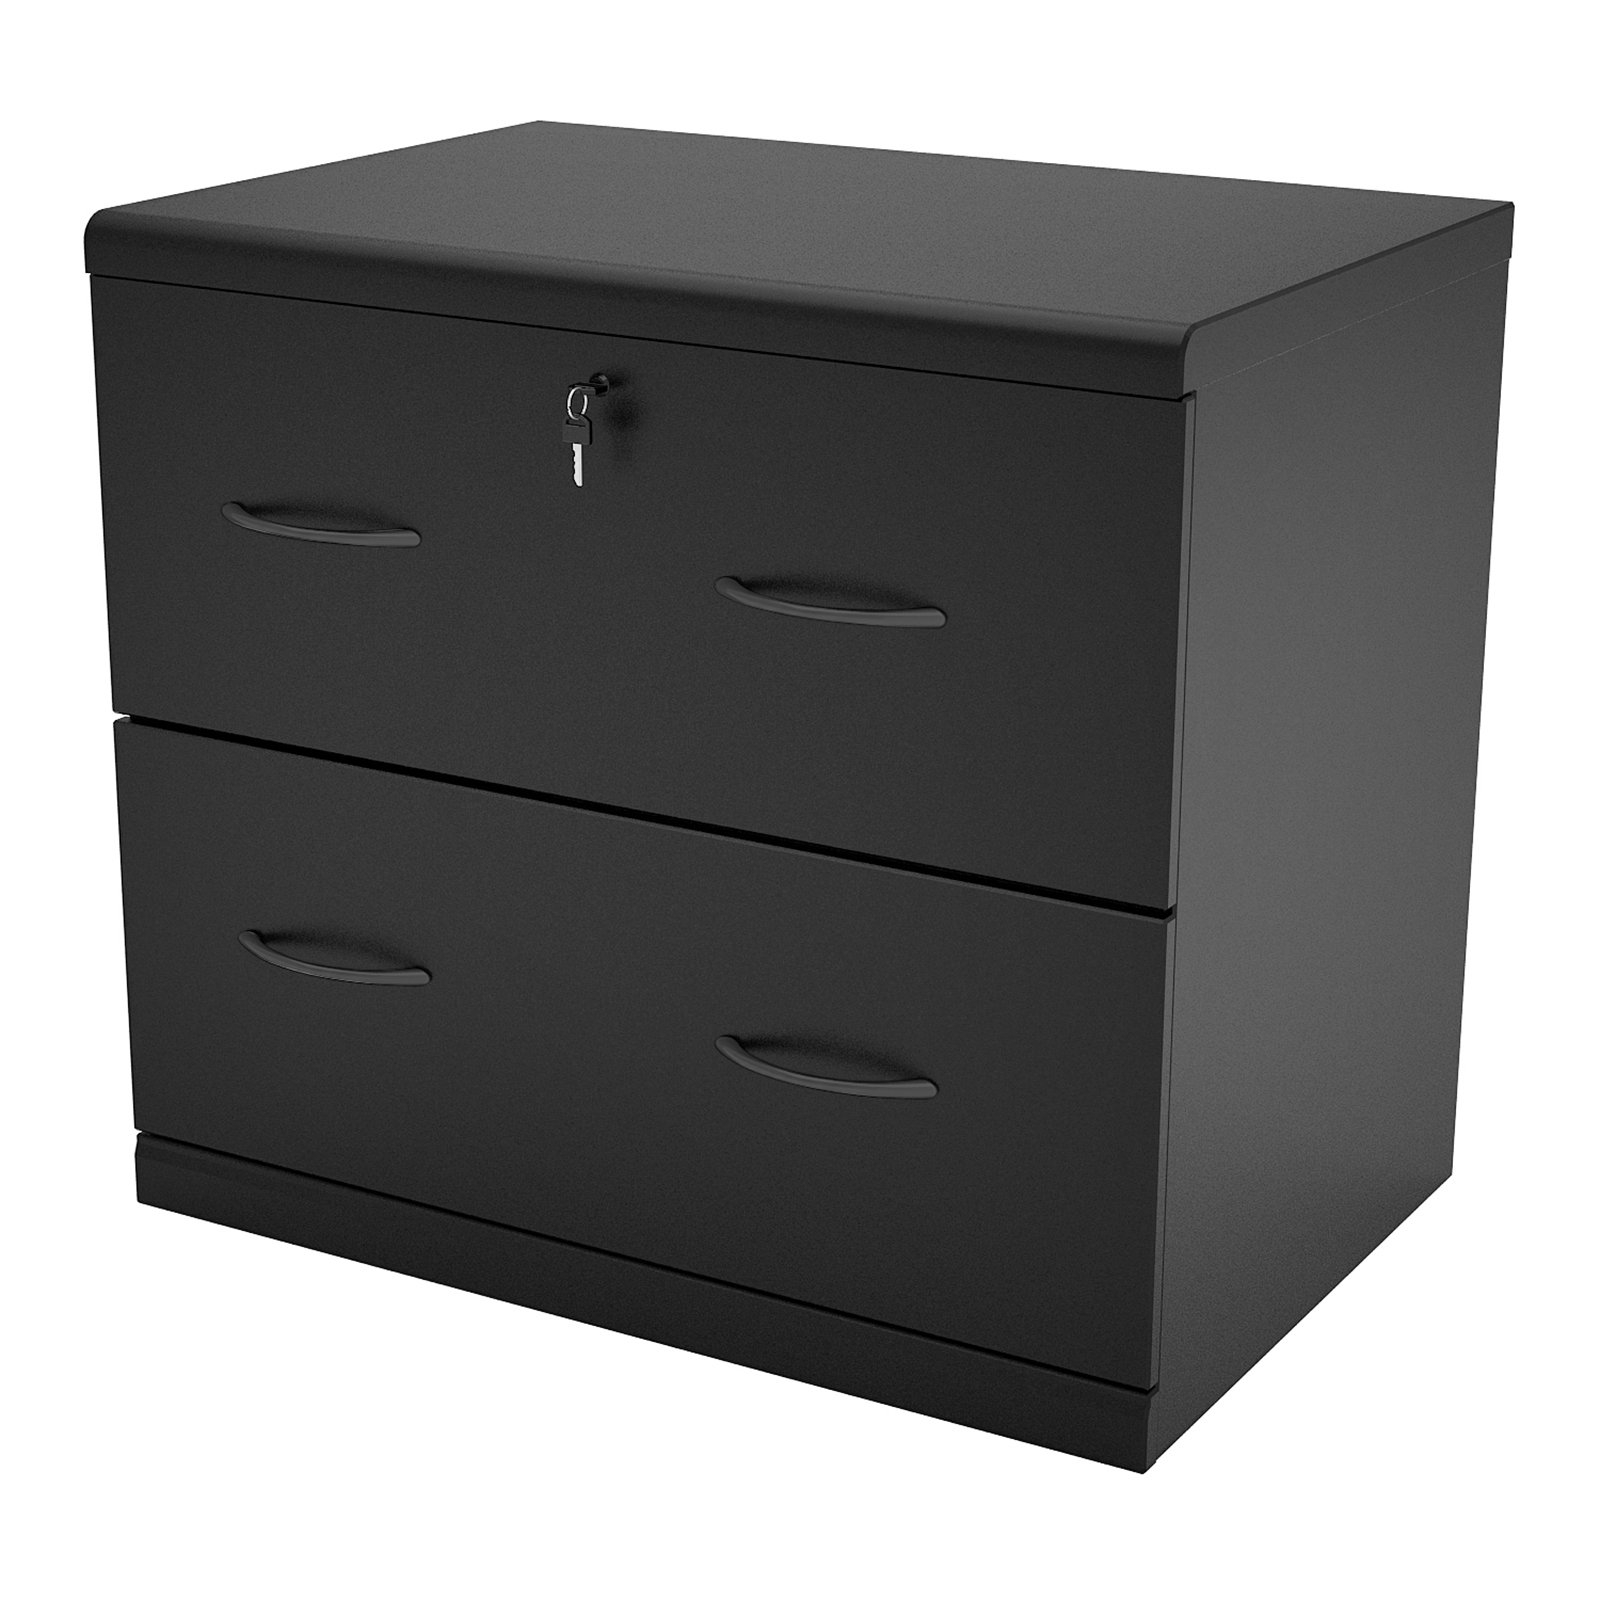 2 Drawer Lateral Wood Lockable Filing Cabinet Black Walmart in dimensions 1600 X 1600